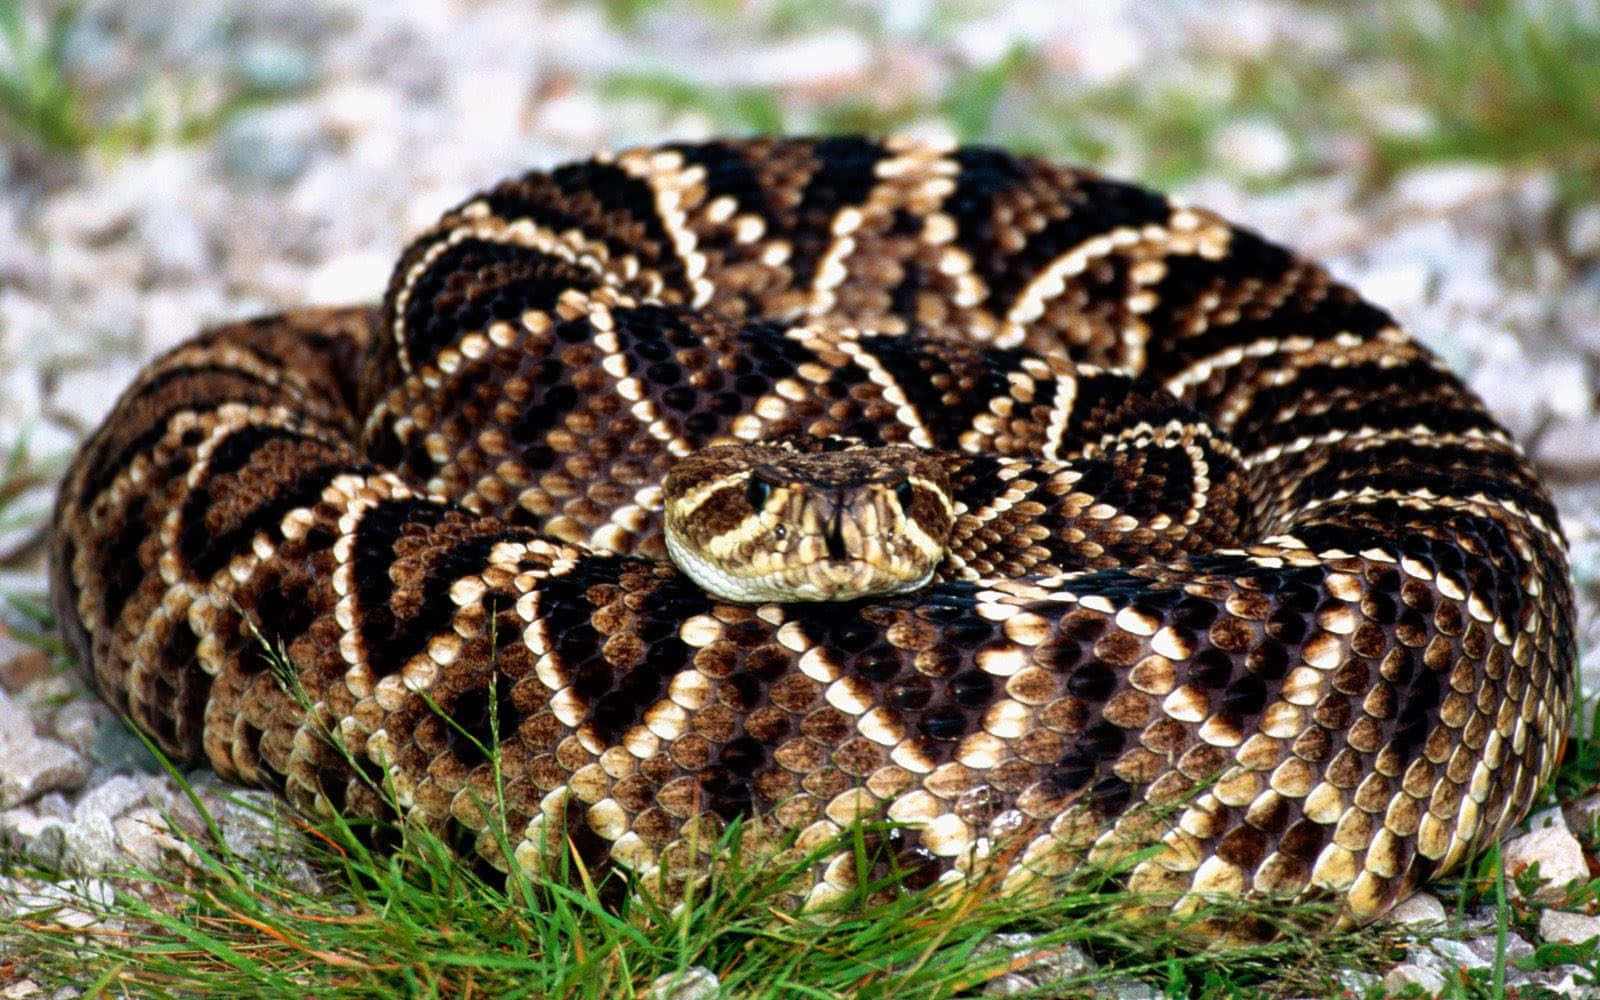 A Rattlesnake Laying On The Ground